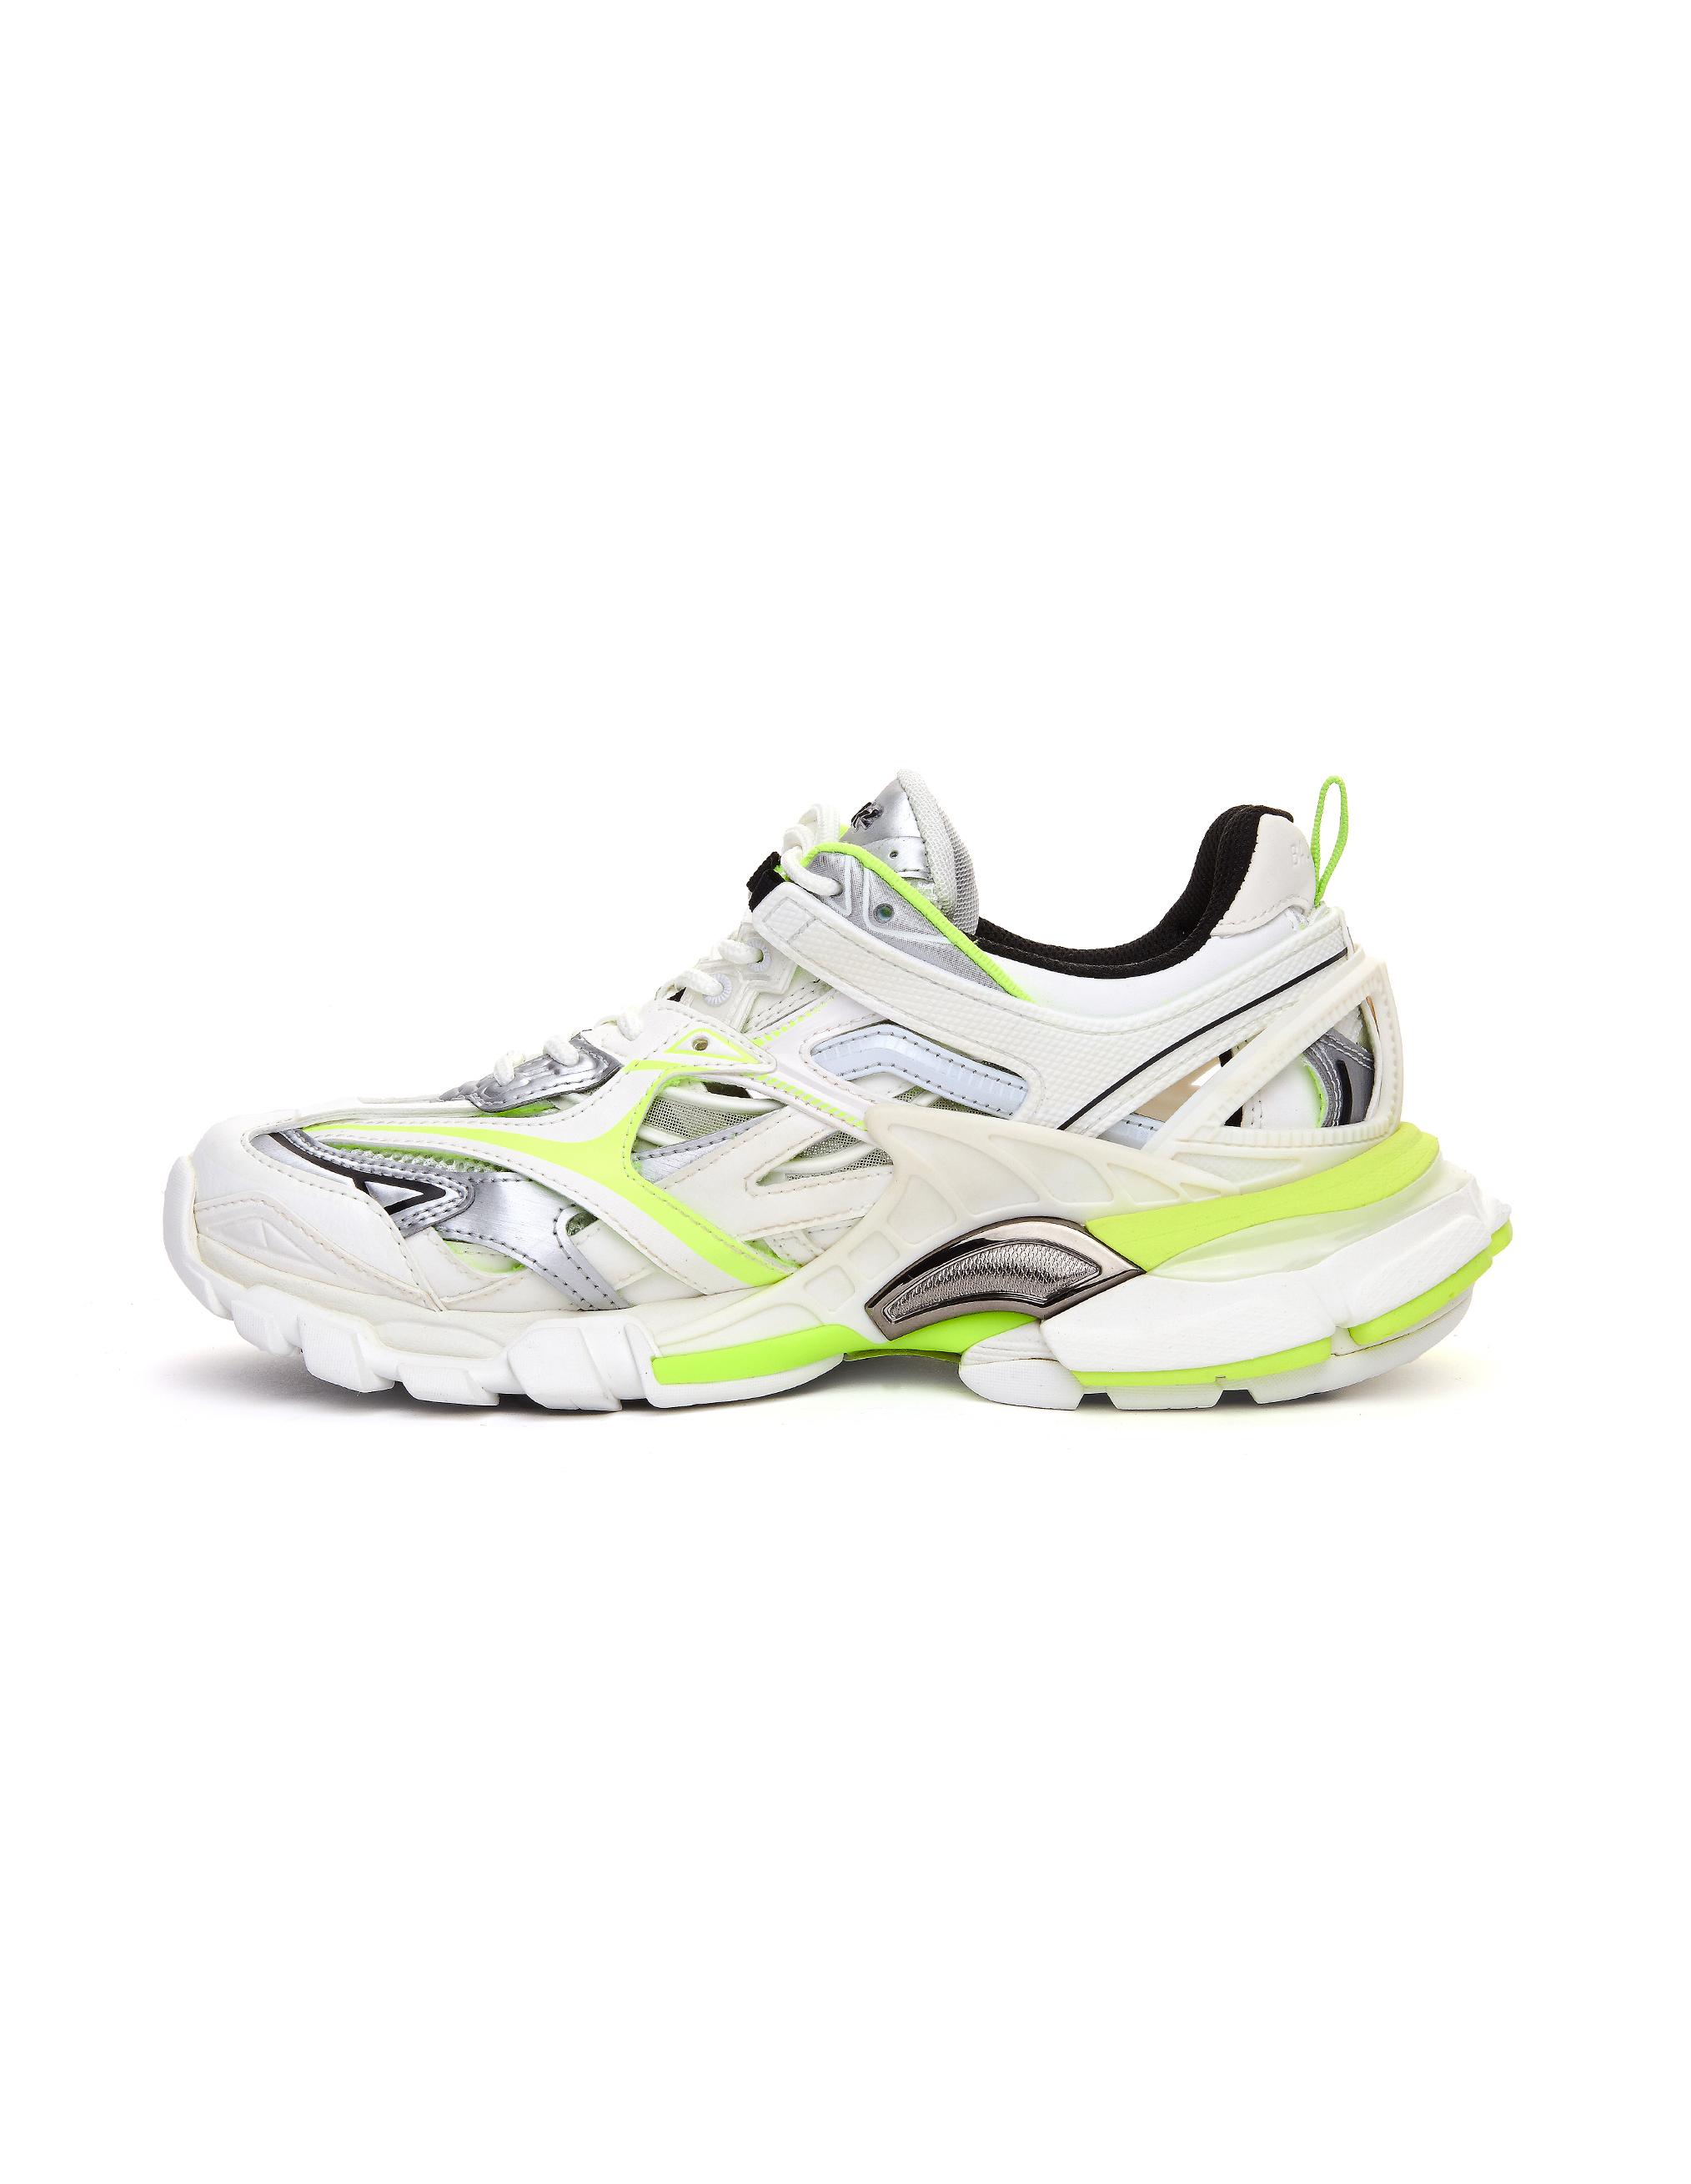 Balenciaga Synthetic White & Green Track 2 Sneakers - Lyst